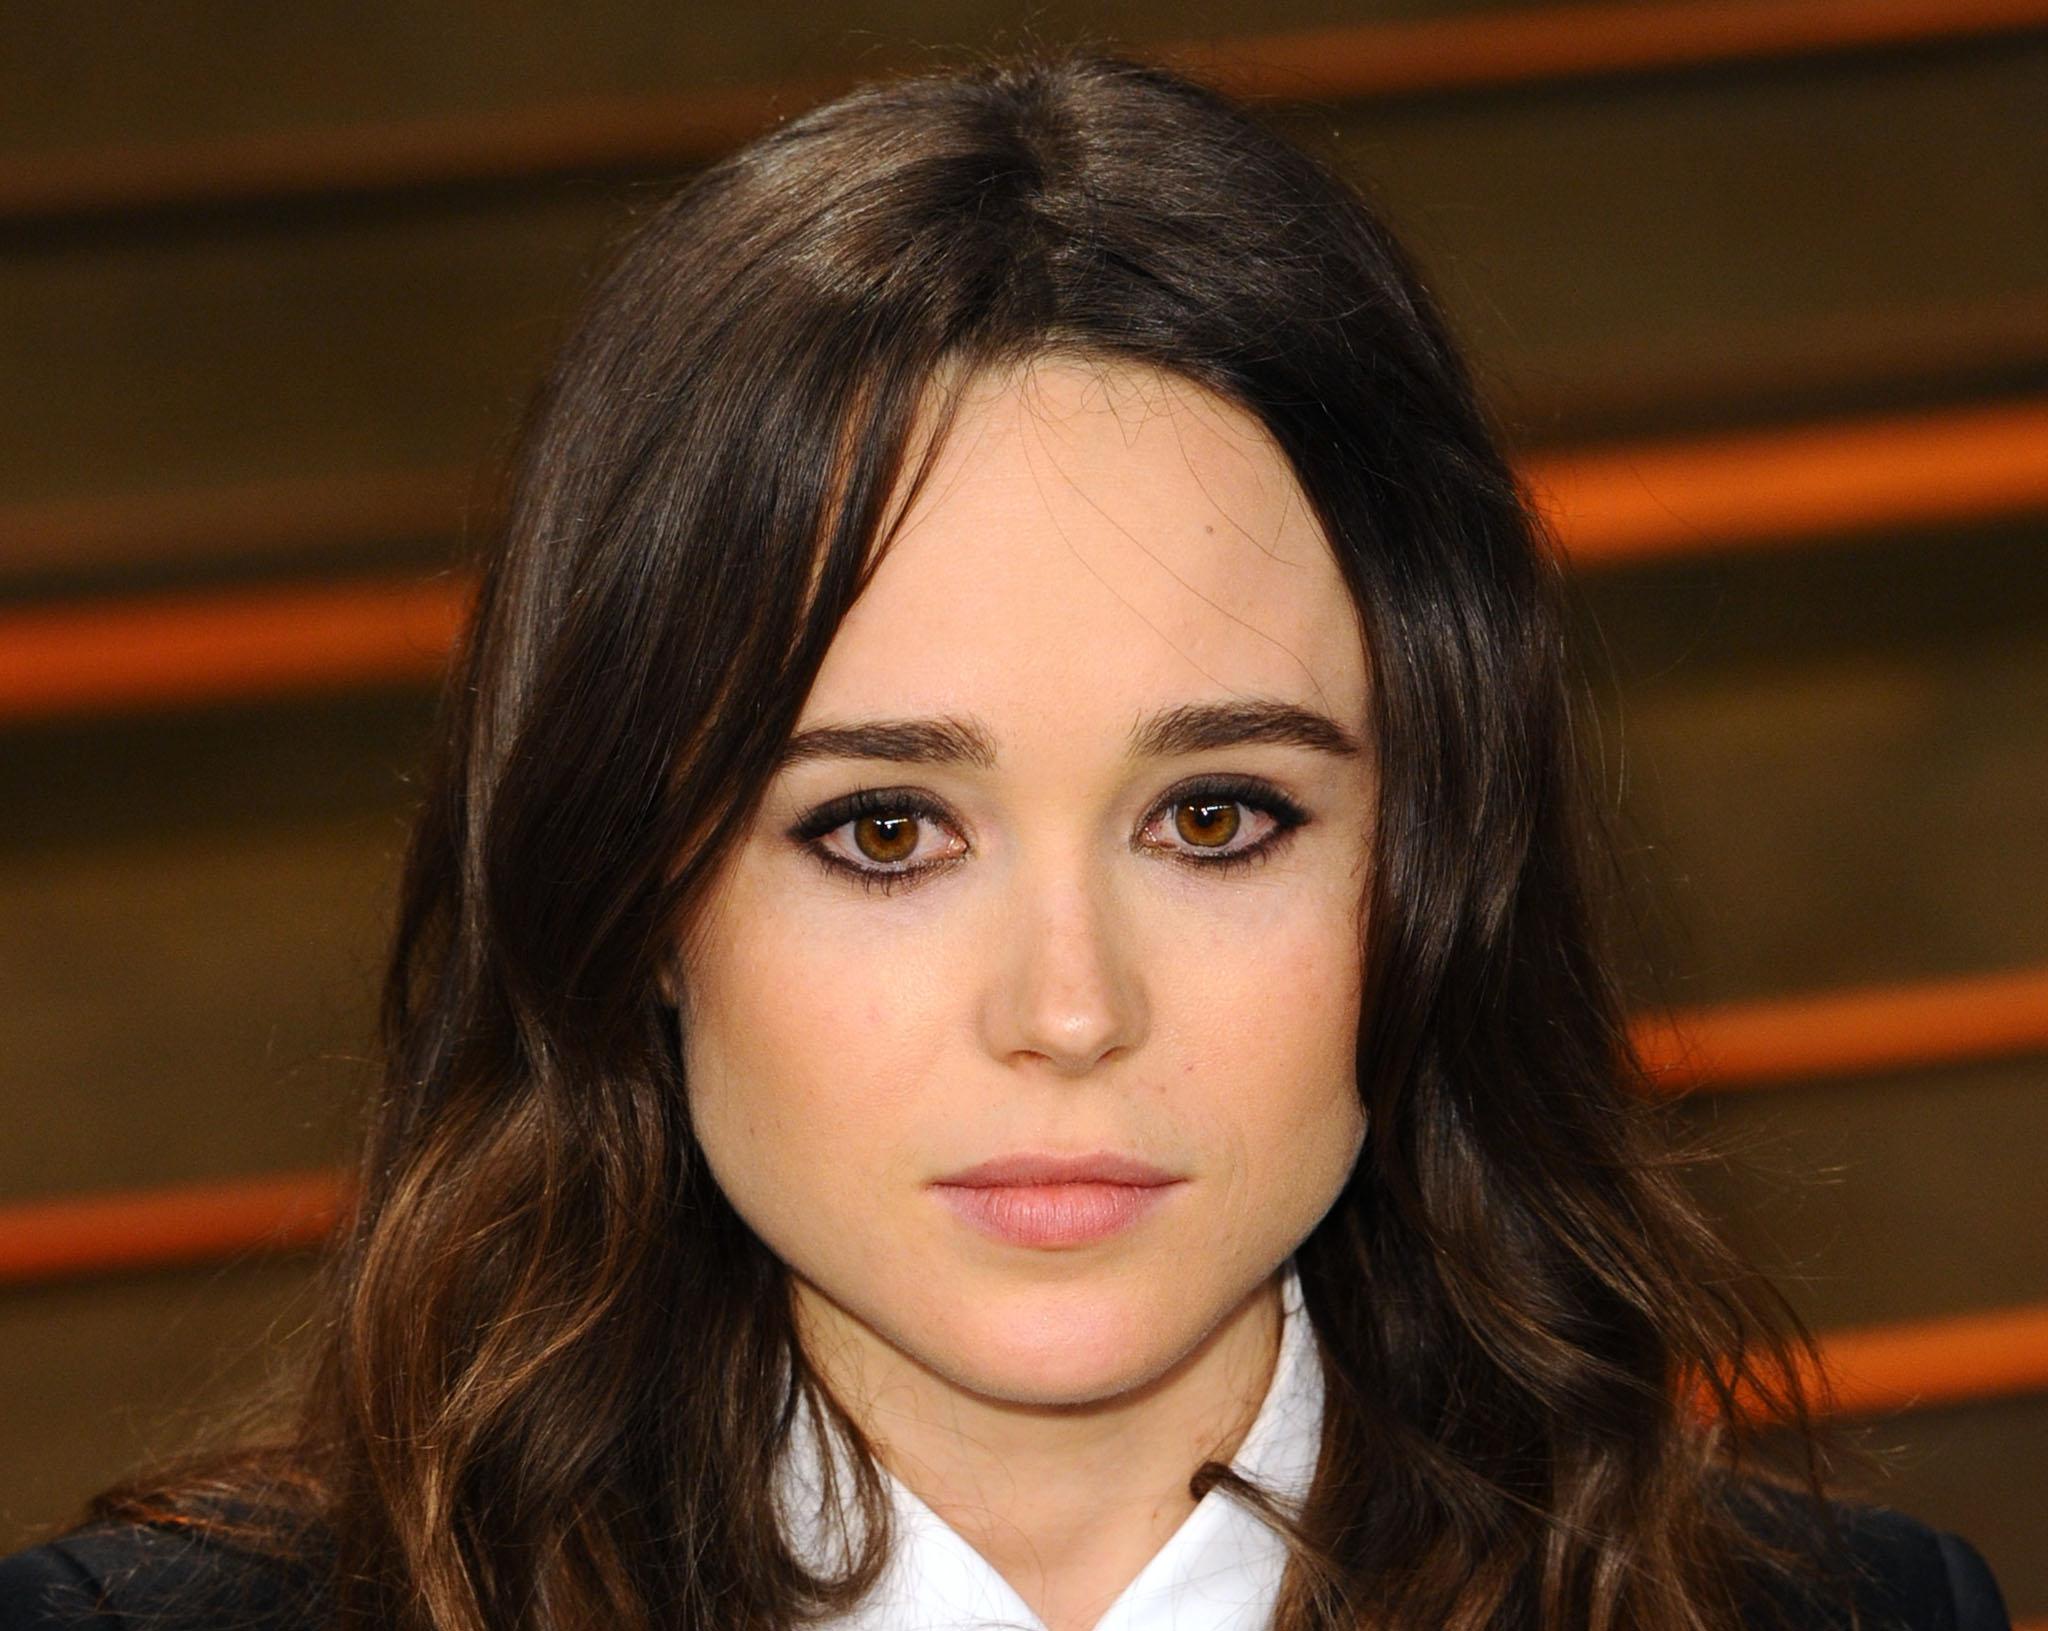 Ellen Page: Actress shames pastor who offers salvation for being gay